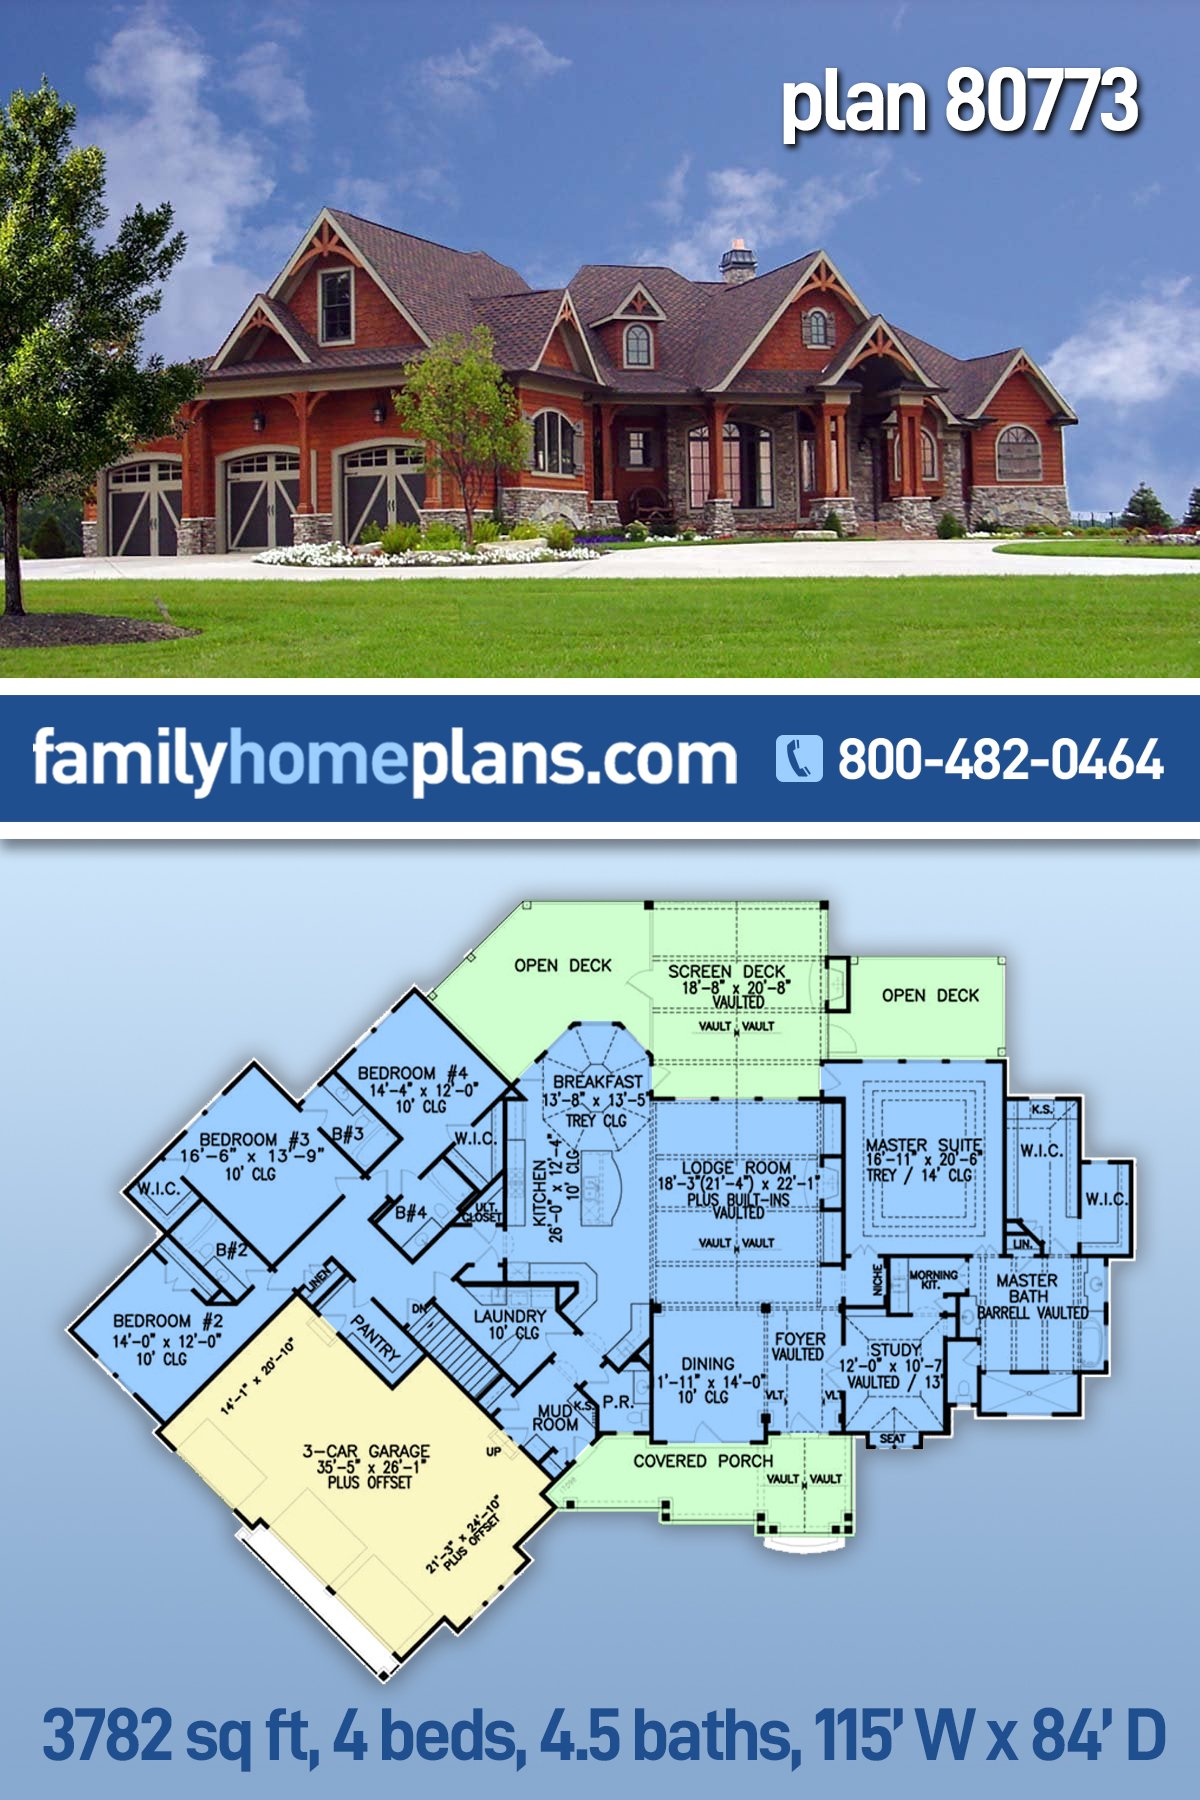 Plan 80773 | New American Style with 4 Bed, 5 Bath, 3 Car Garage